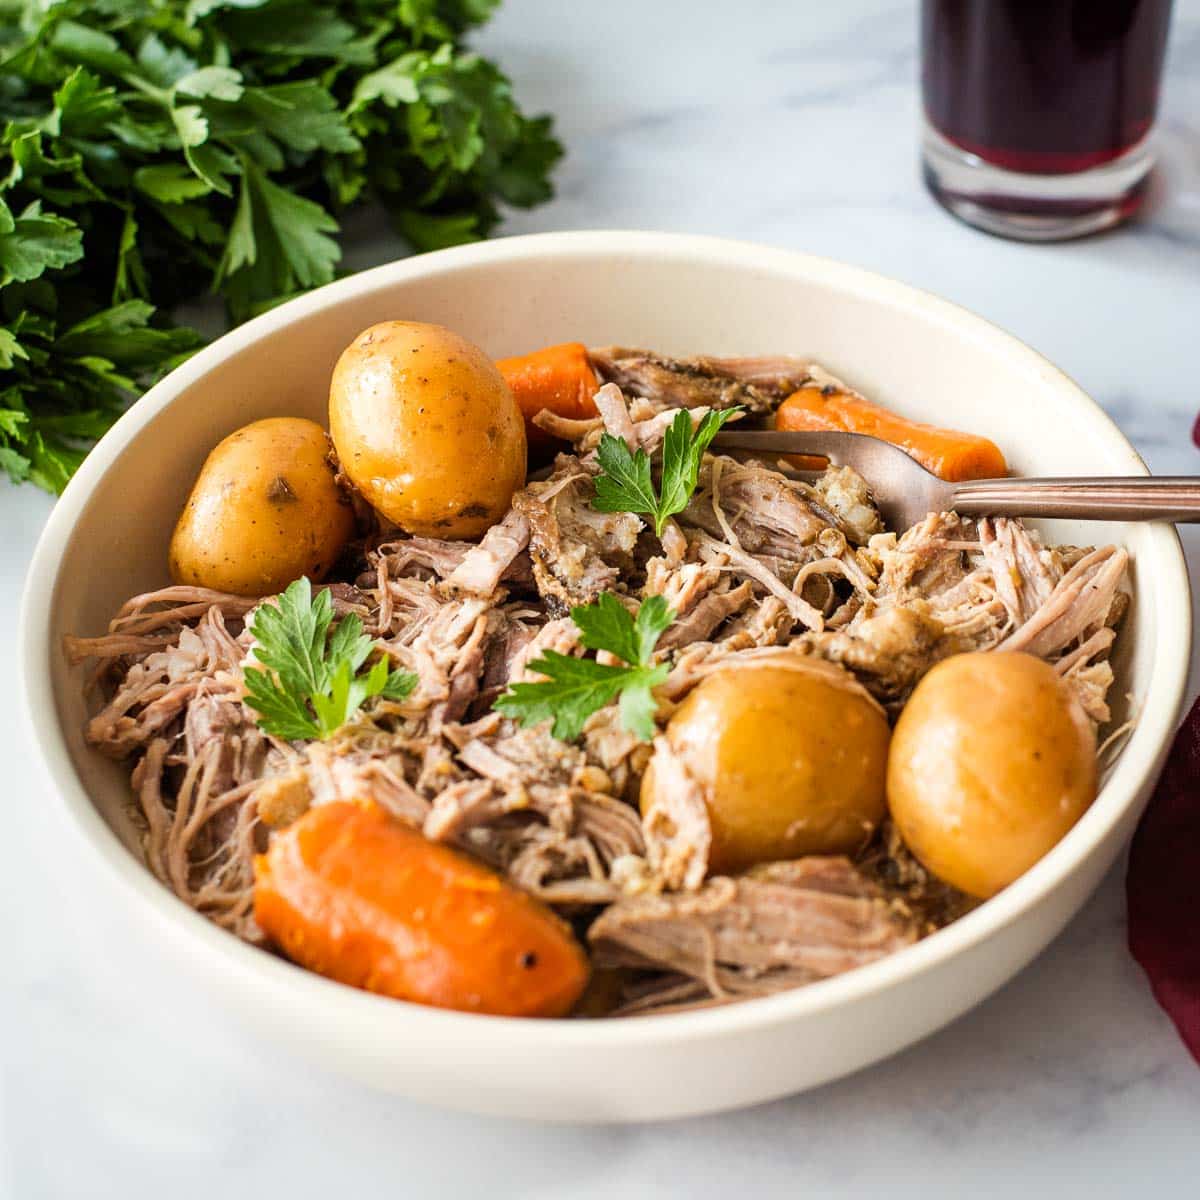 A bowl of roast pork with potatoes and carrots.